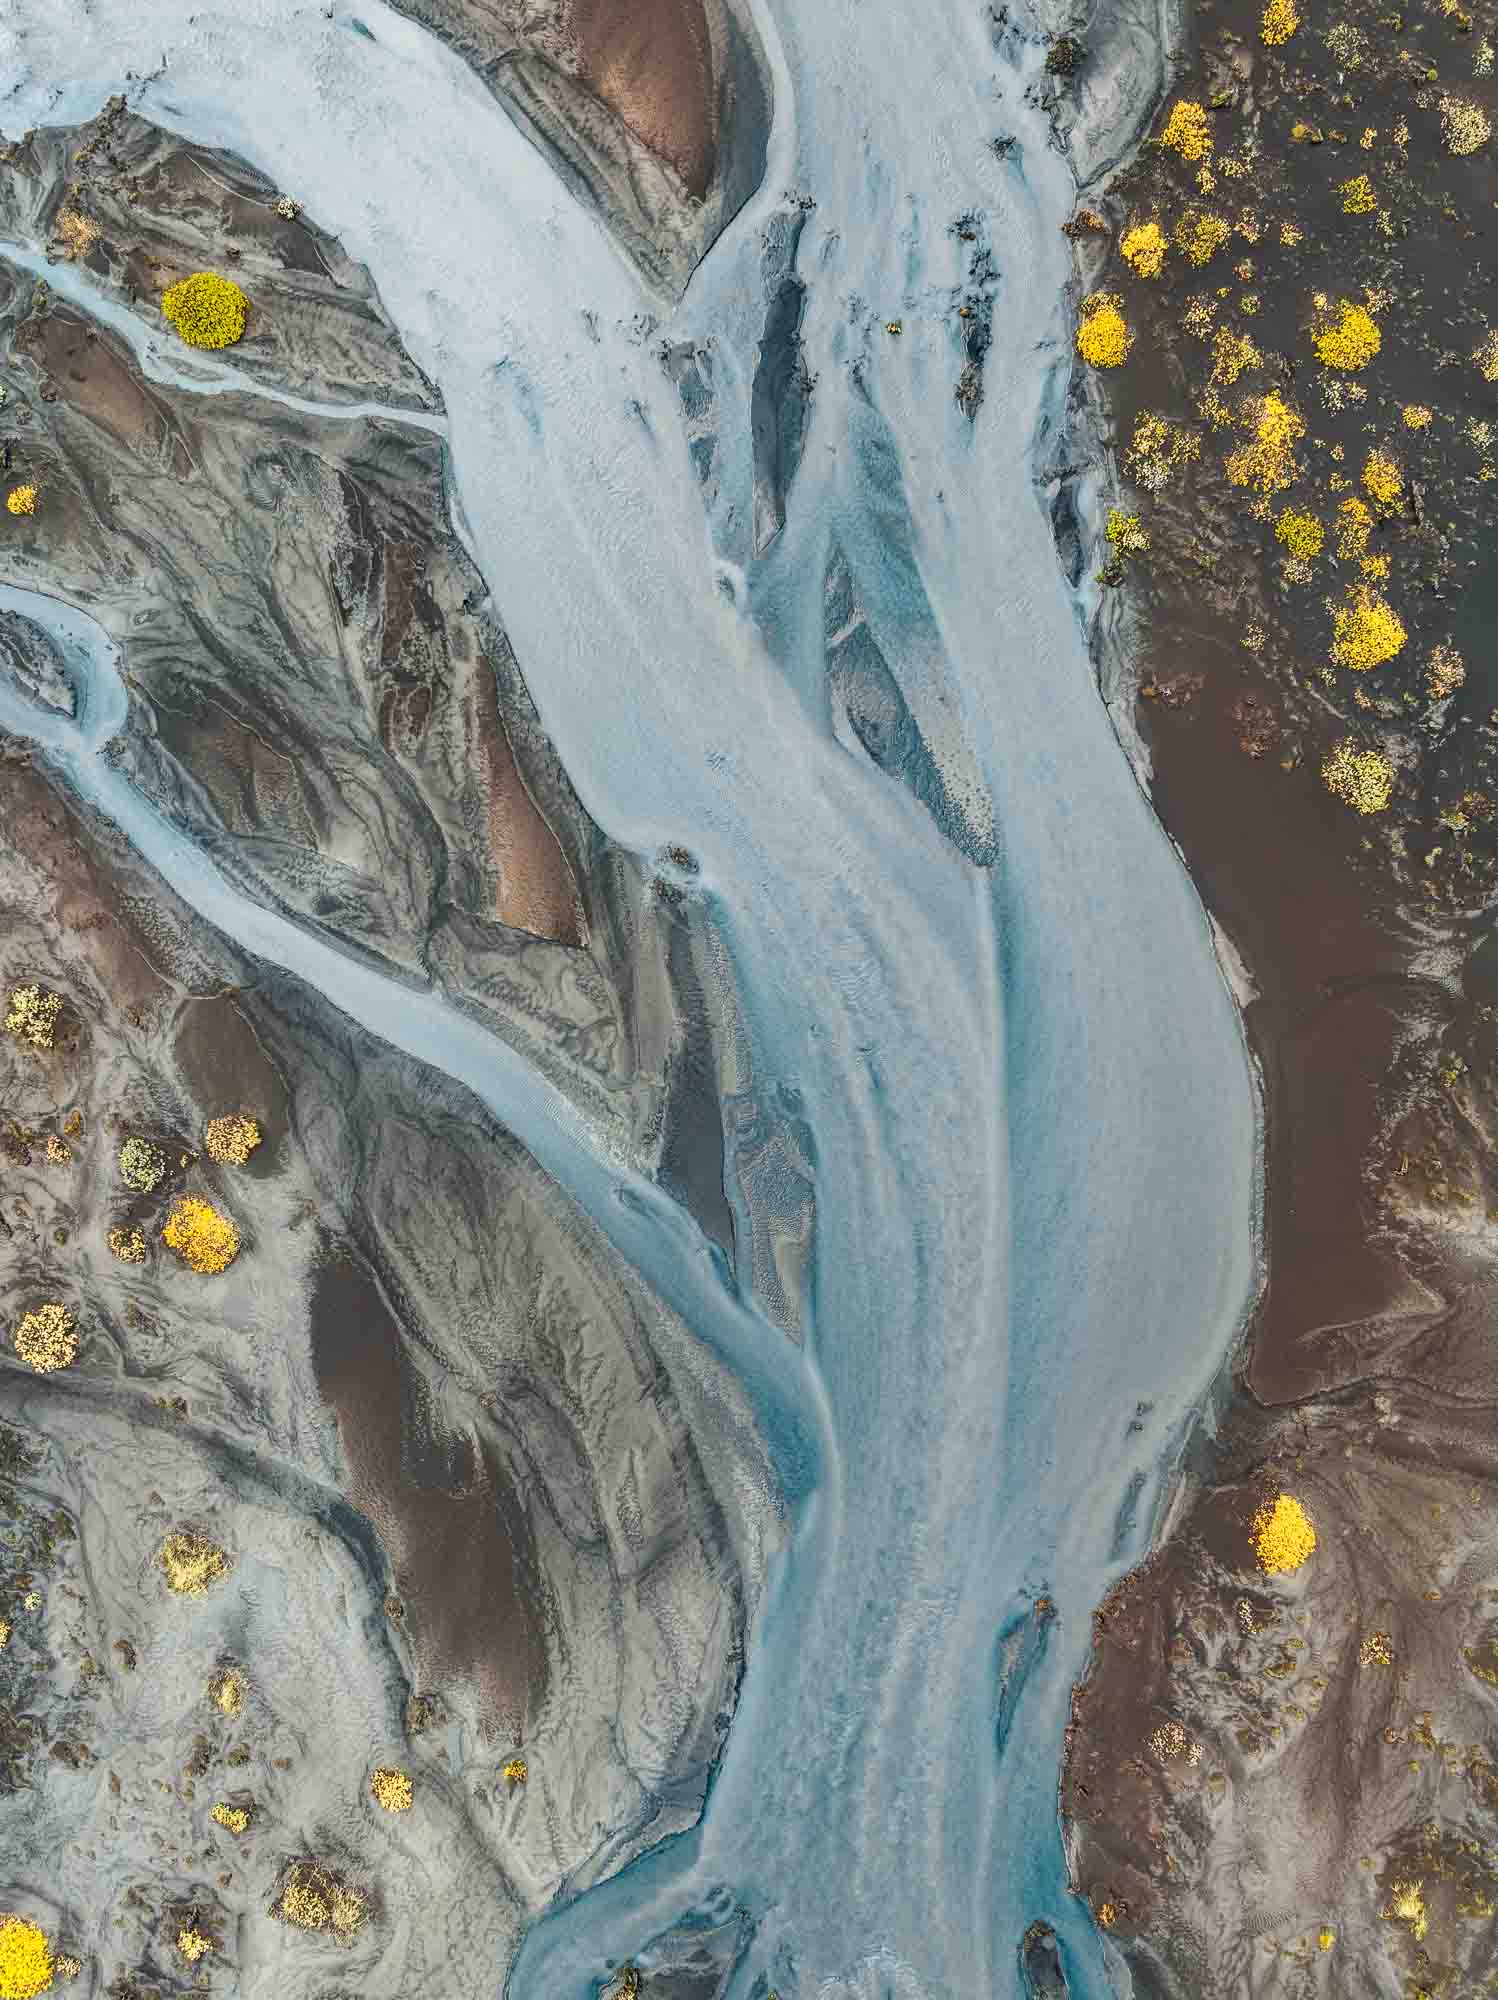 Aerial photo of a ghostly pale blue river snaking through the darker earth in Iceland, with patches of bright yellow flora.